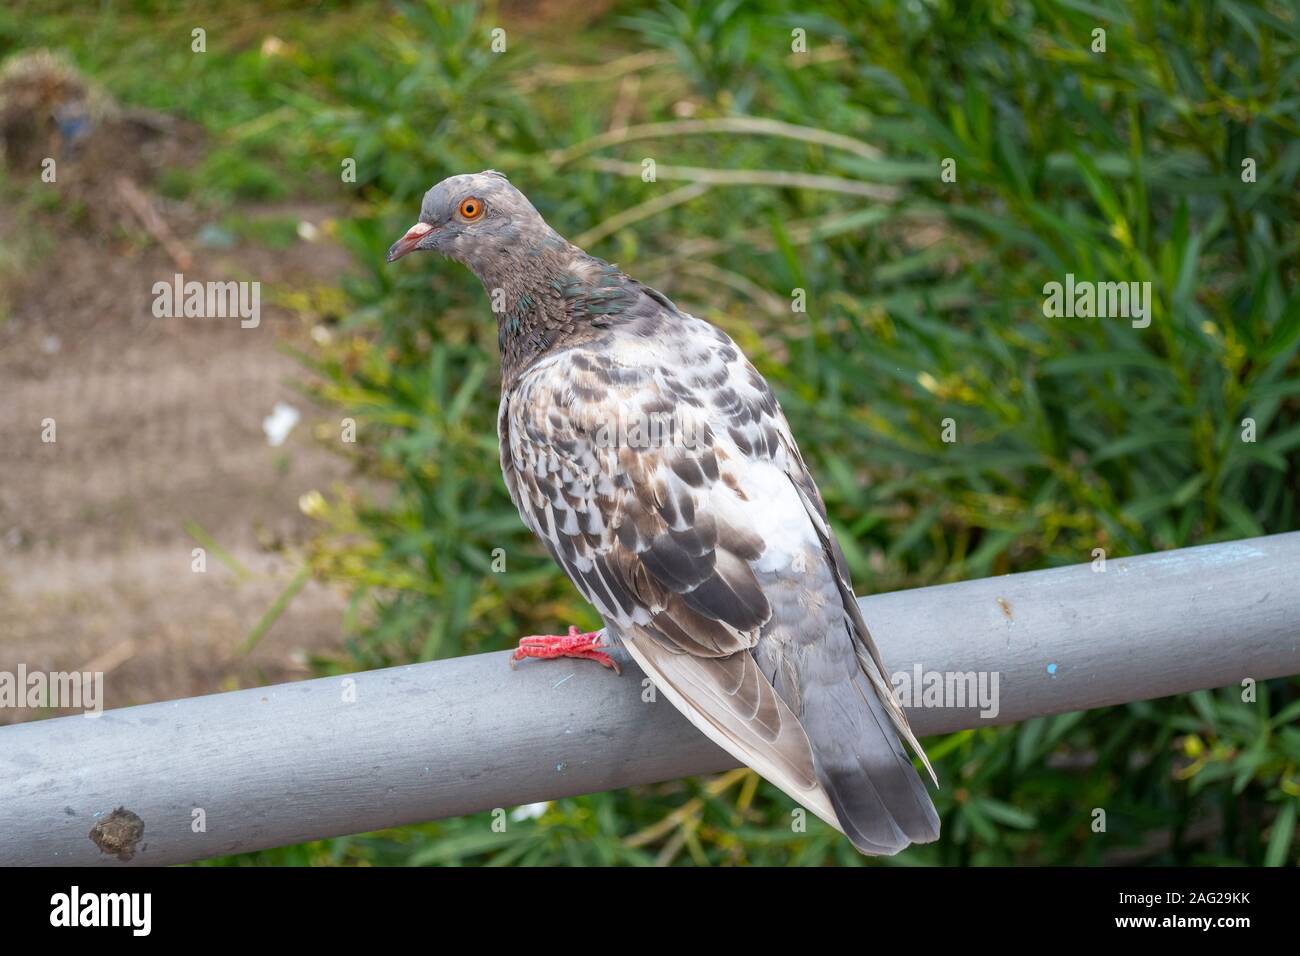 A brown, gray and white pigeon with orange eyes sits on a metal railing outdoors. Stock Photo